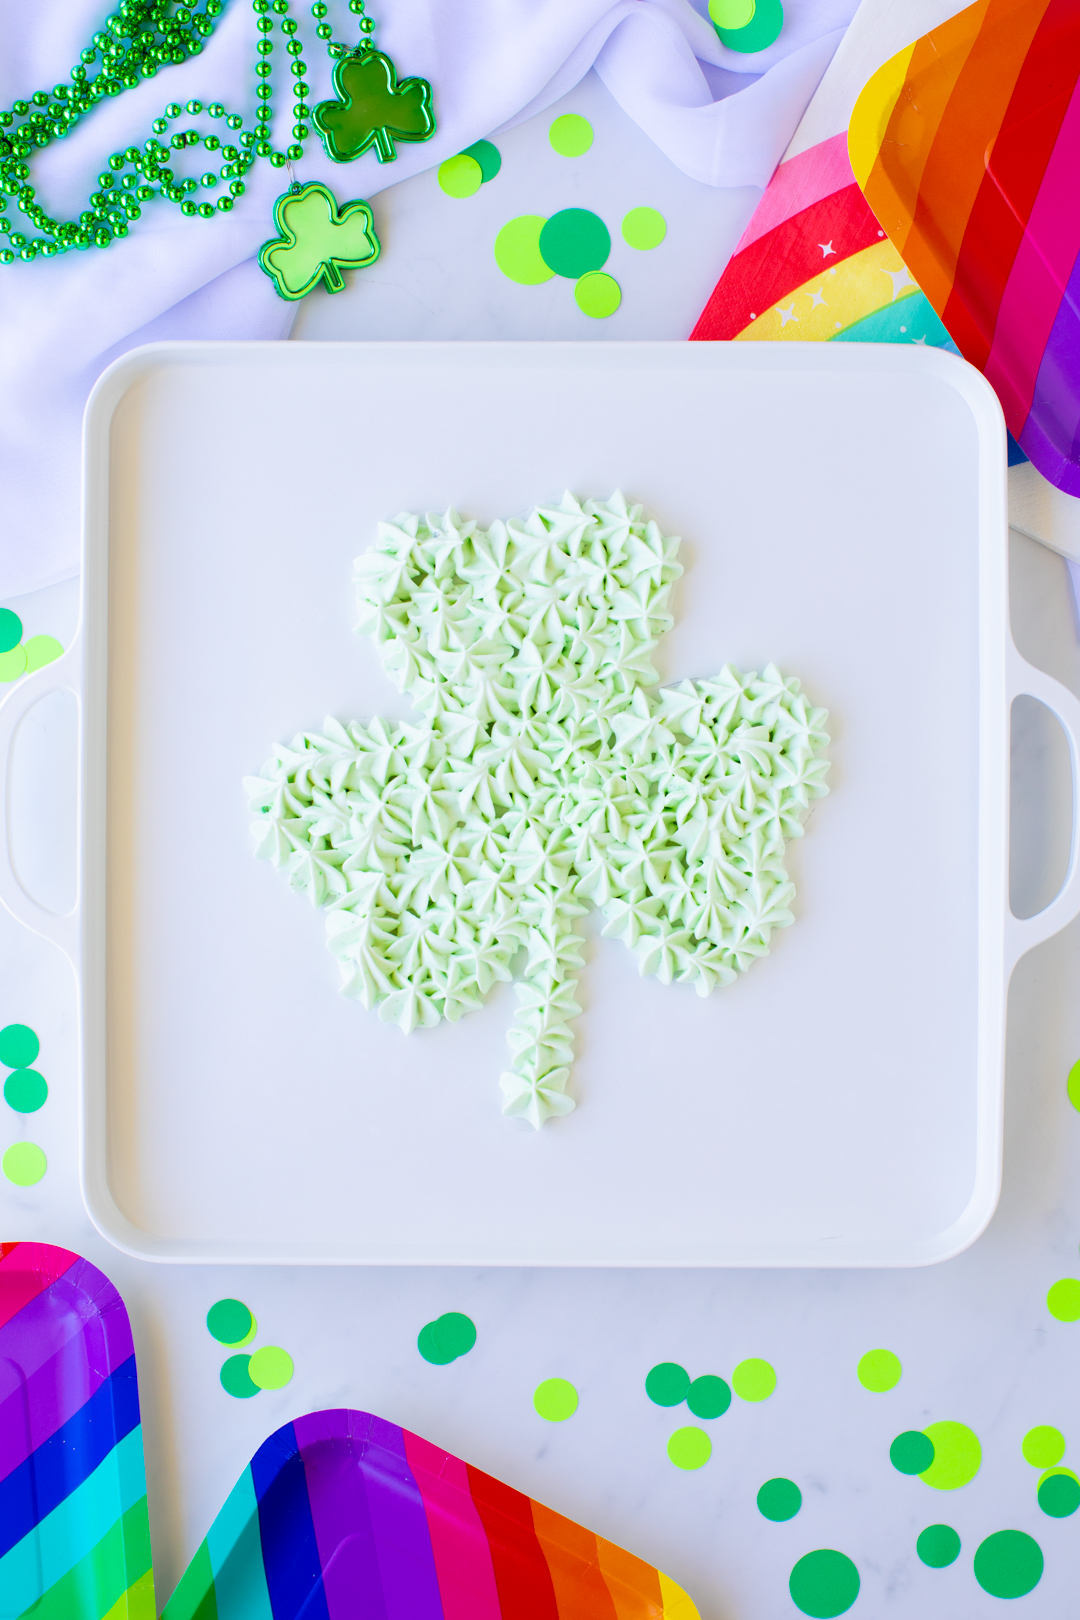 a simple light green shamrock piped onto a serving try using pistachio dip